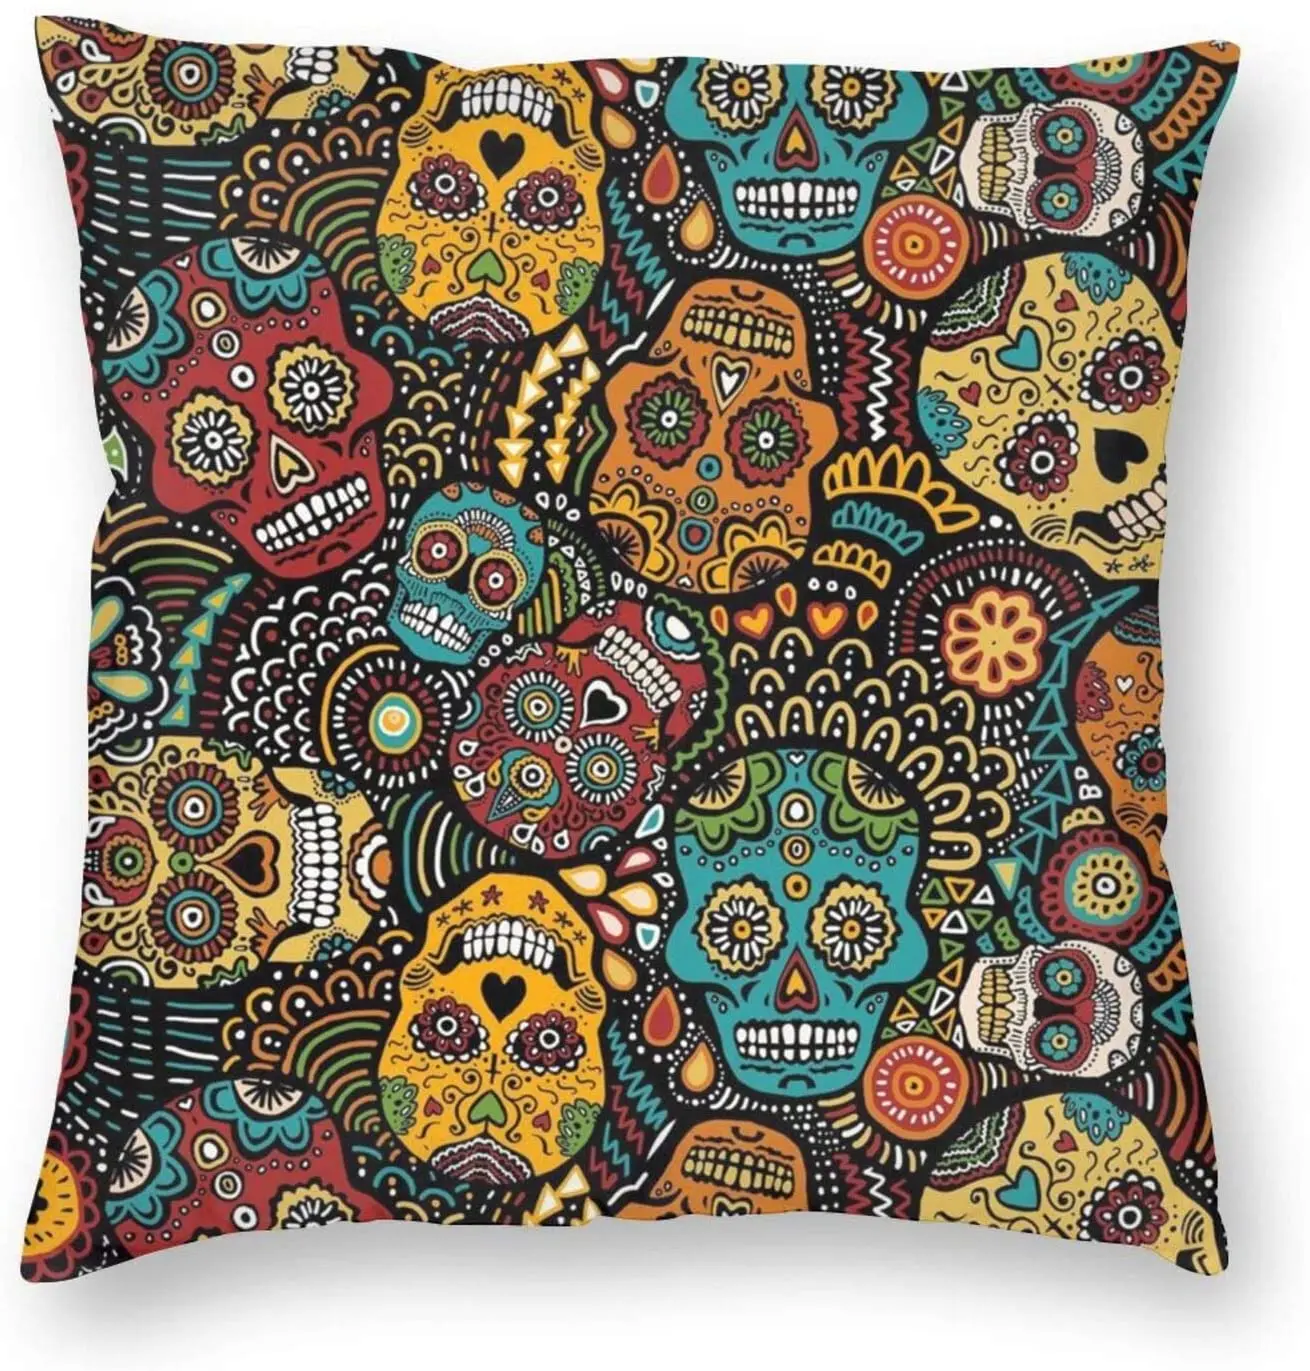 

Mexican Sugar Skulls Throw Pillow Case Cushion Cover Square Standard Home Decorative for Men Women 18x18 Inch